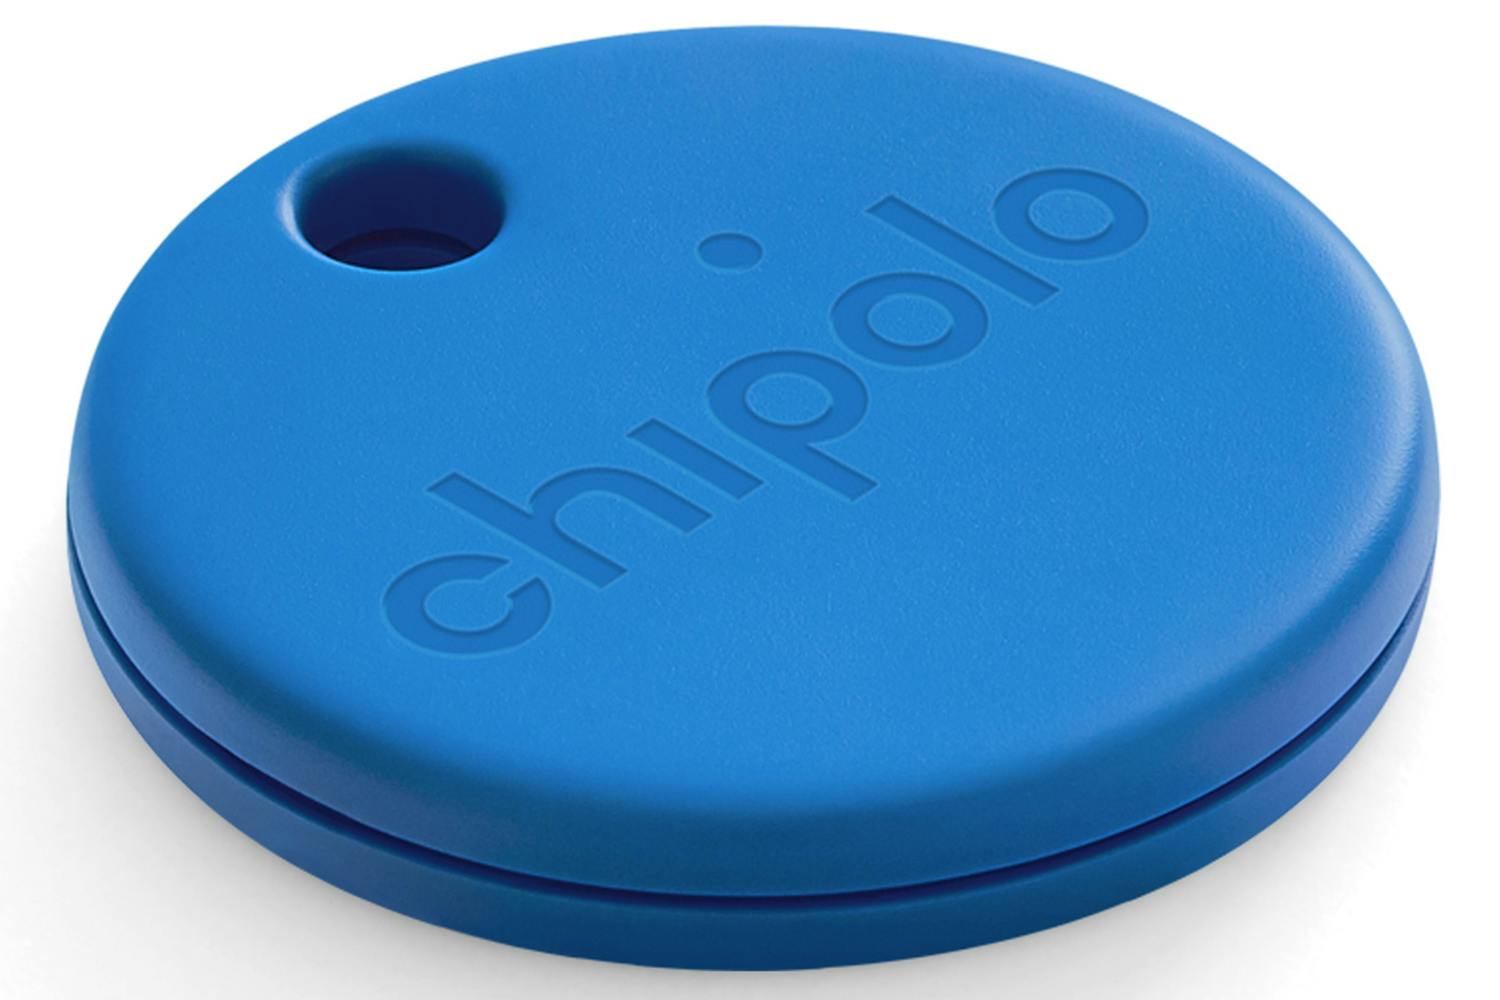 Chipolo One Bluetooth Item Finder | Blue